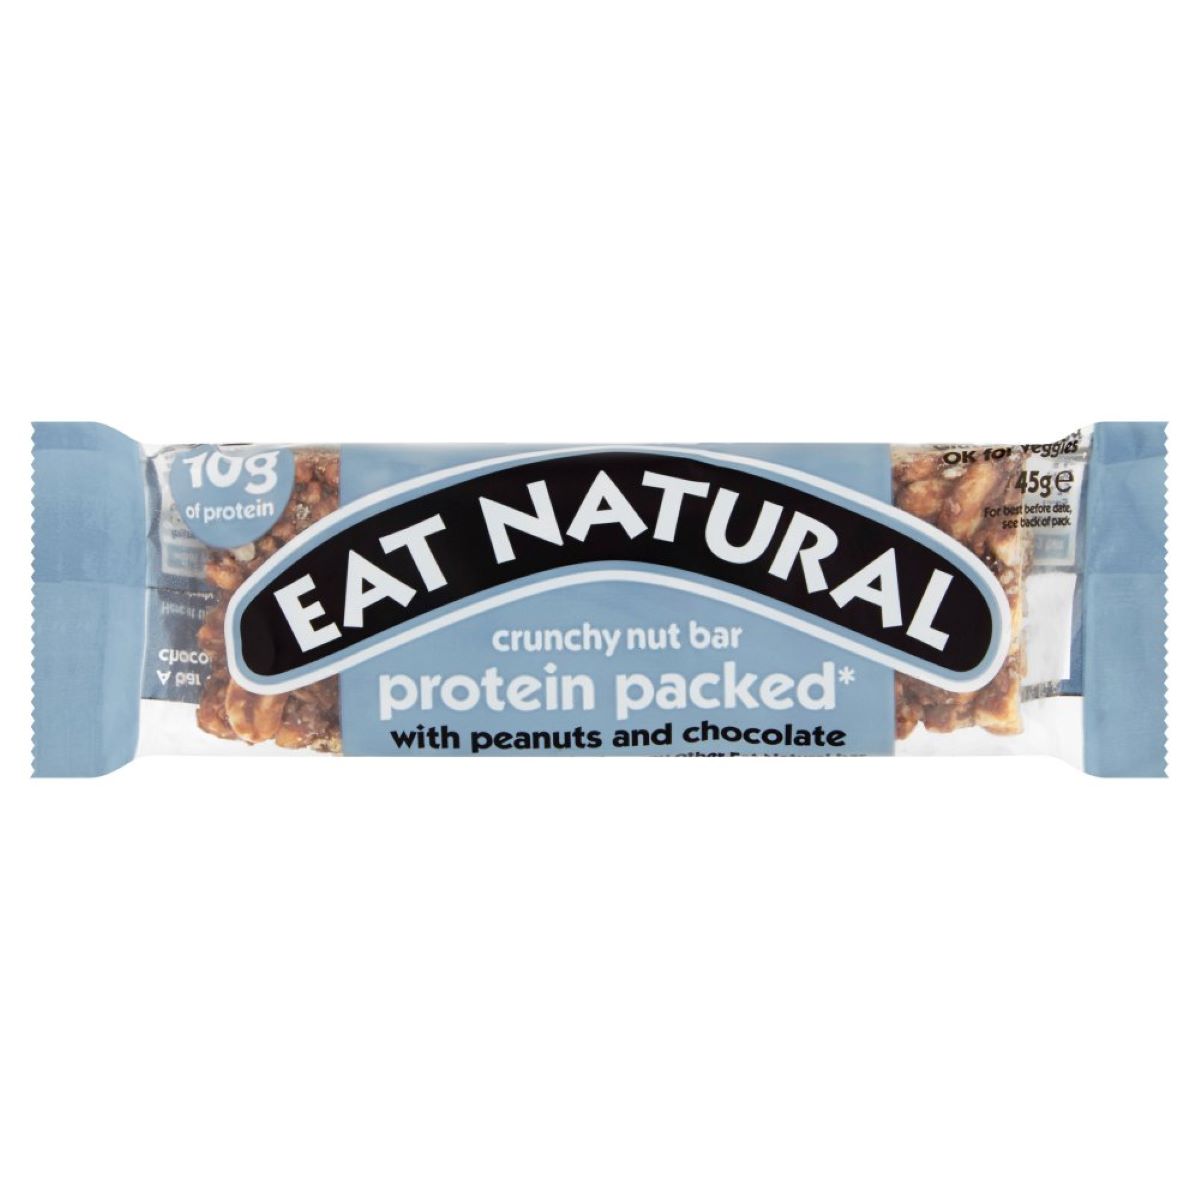 Eat Natural Protein Packed Peanuts & Chocolate Bars 45g